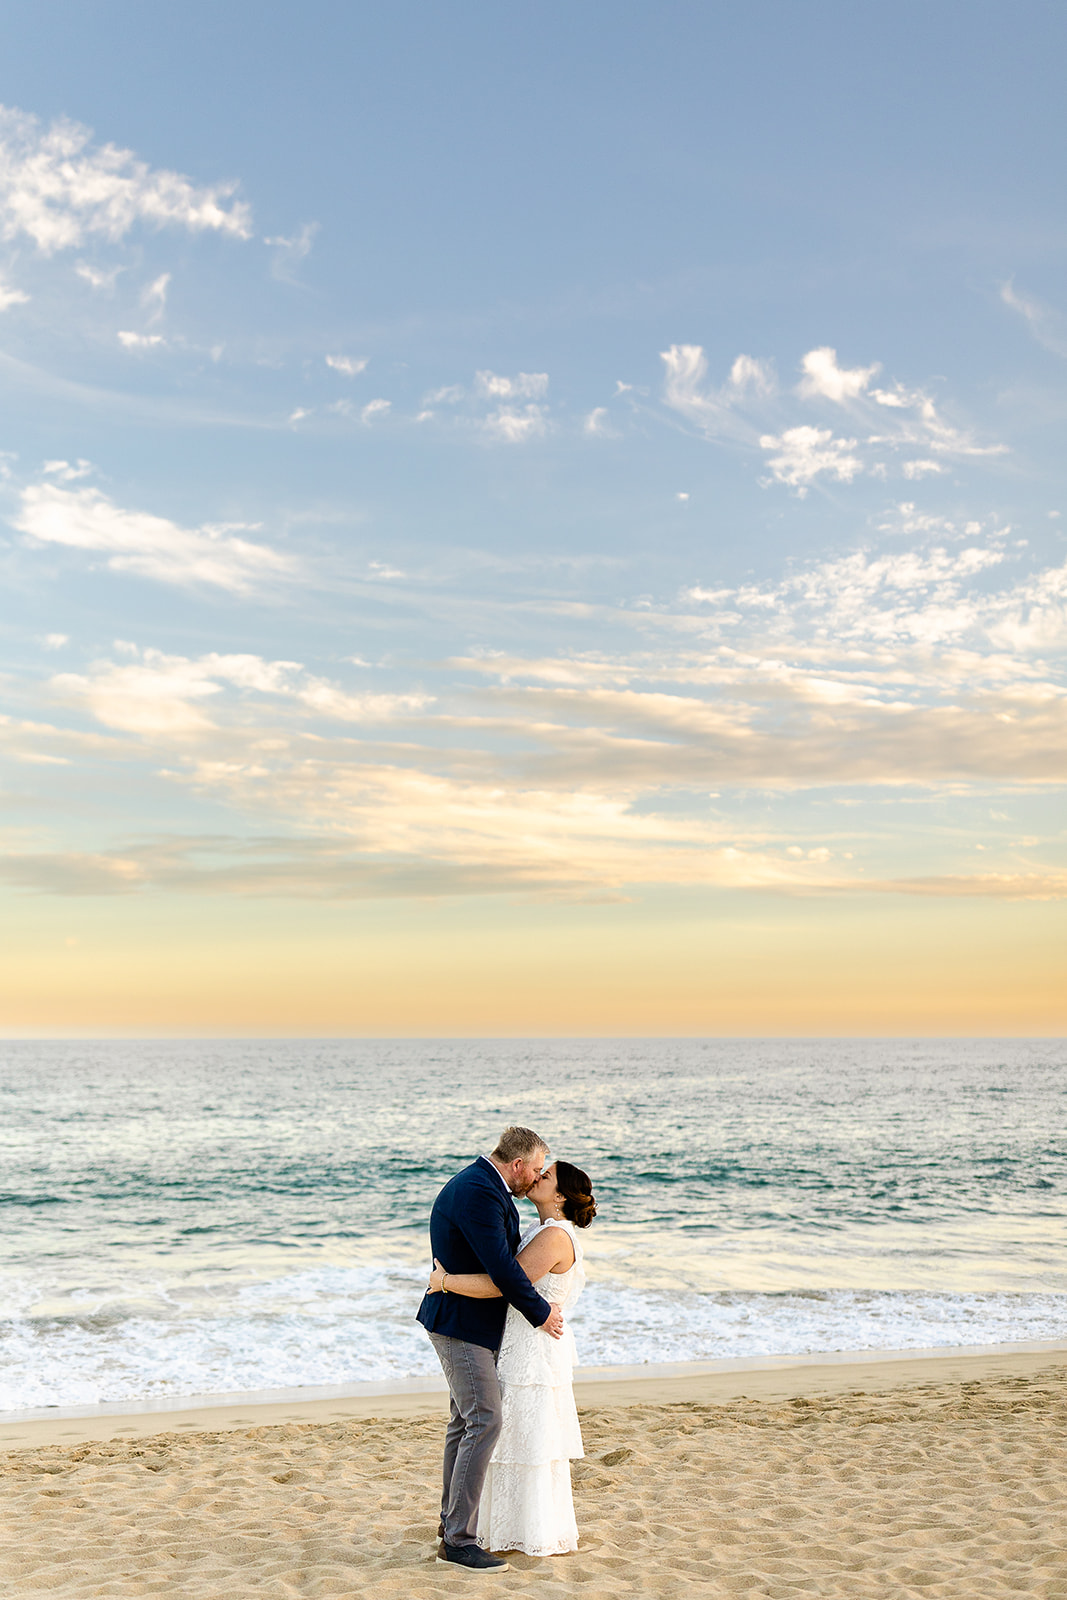 Couple hugging and kissing on the beach with the ocean behind them